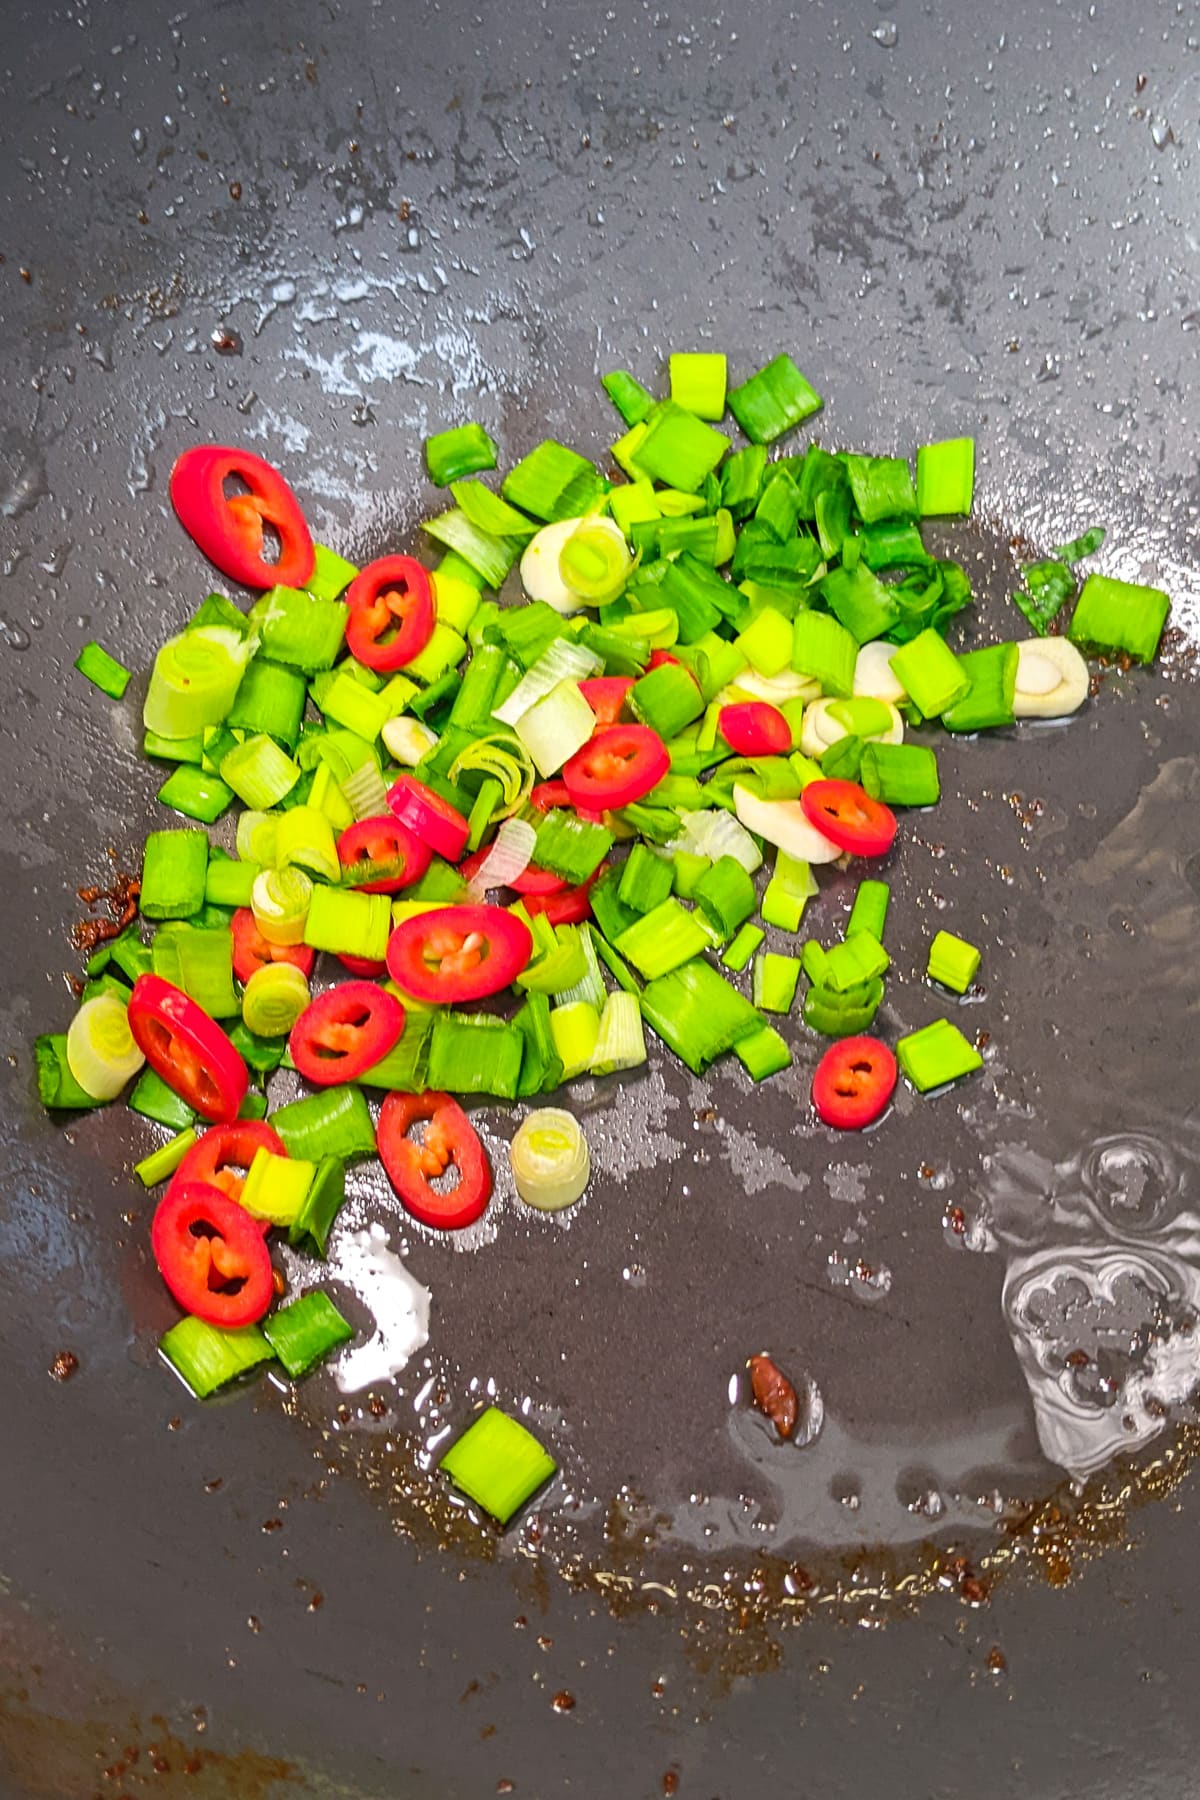 Frying green onions with garlic and chili pepper.